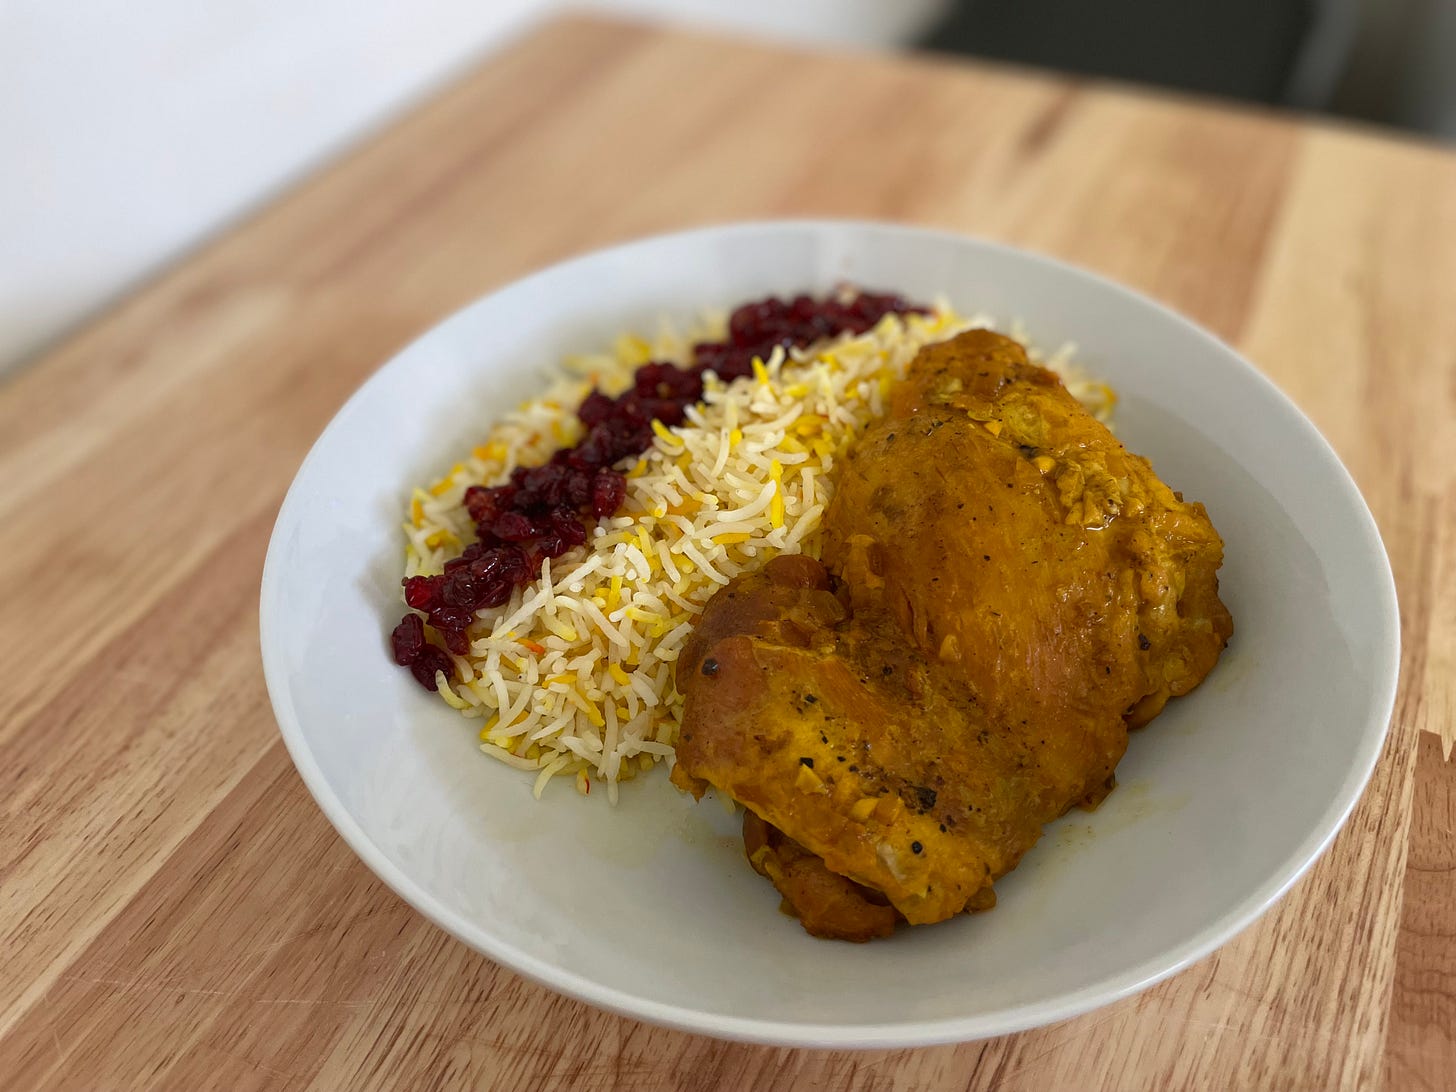 Saffron chicken thigh served with basmati rice and barberries